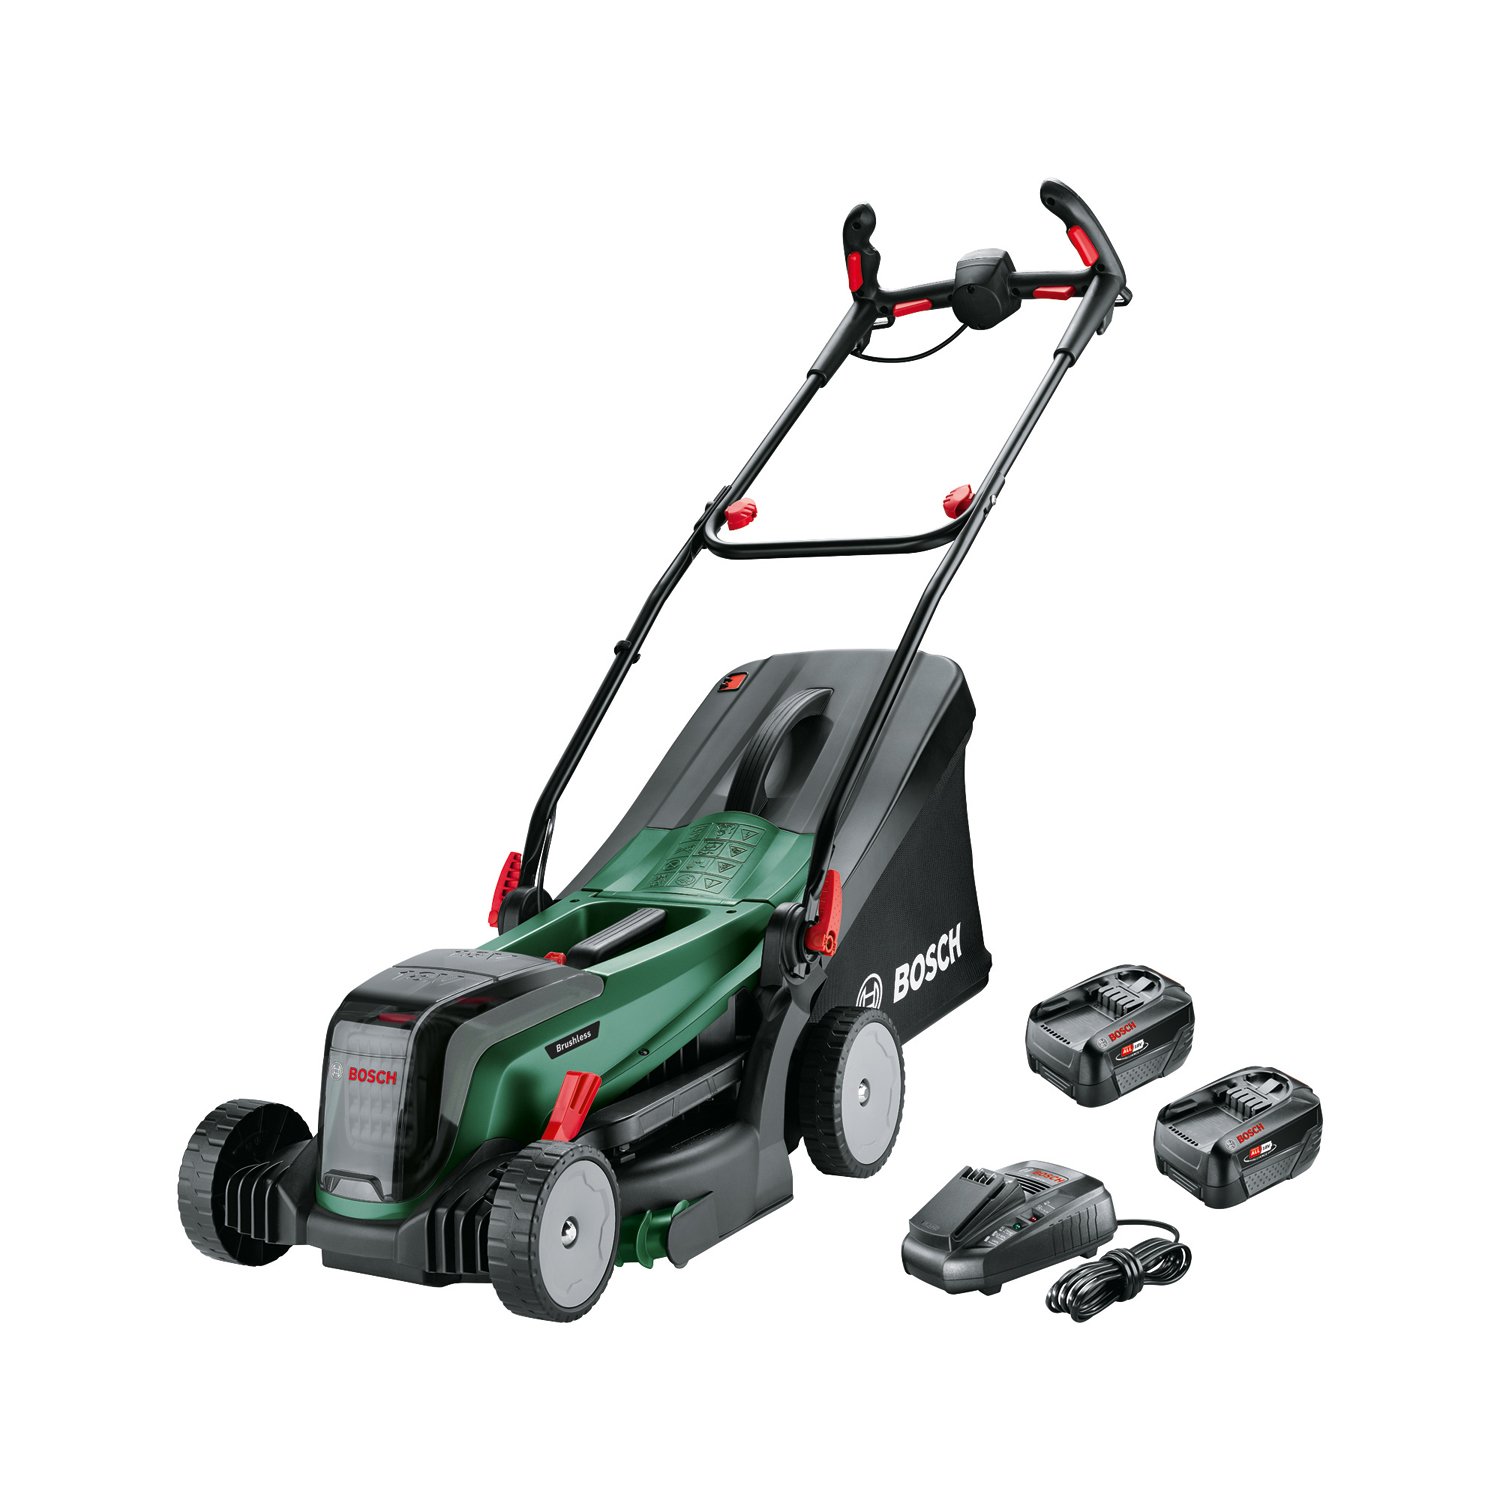 Bosch - UniversalRotak 2x18V 37-550 ( Charger&2 x Battery Included )